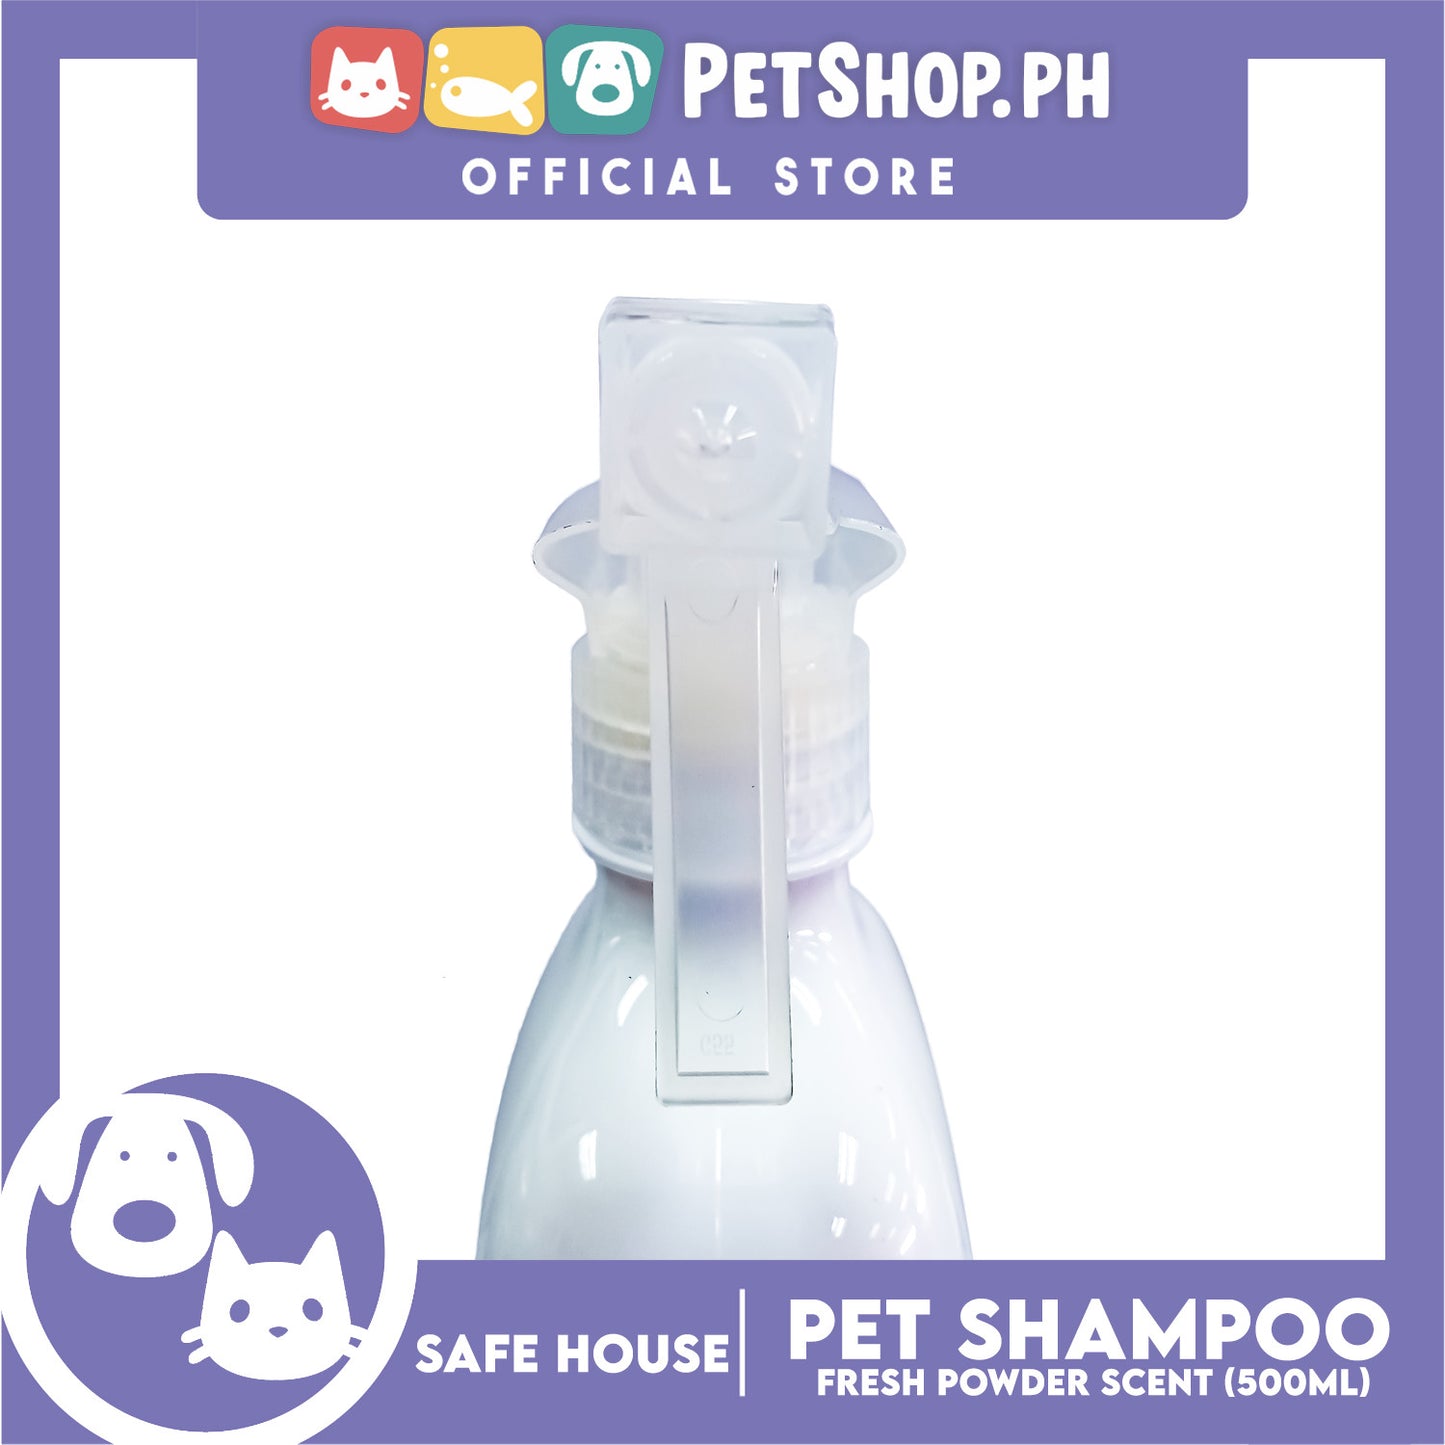 Safe House Natural Pet Care Solutions, Waterless Shampoo Fresh Powder Scent for Pets 500ml